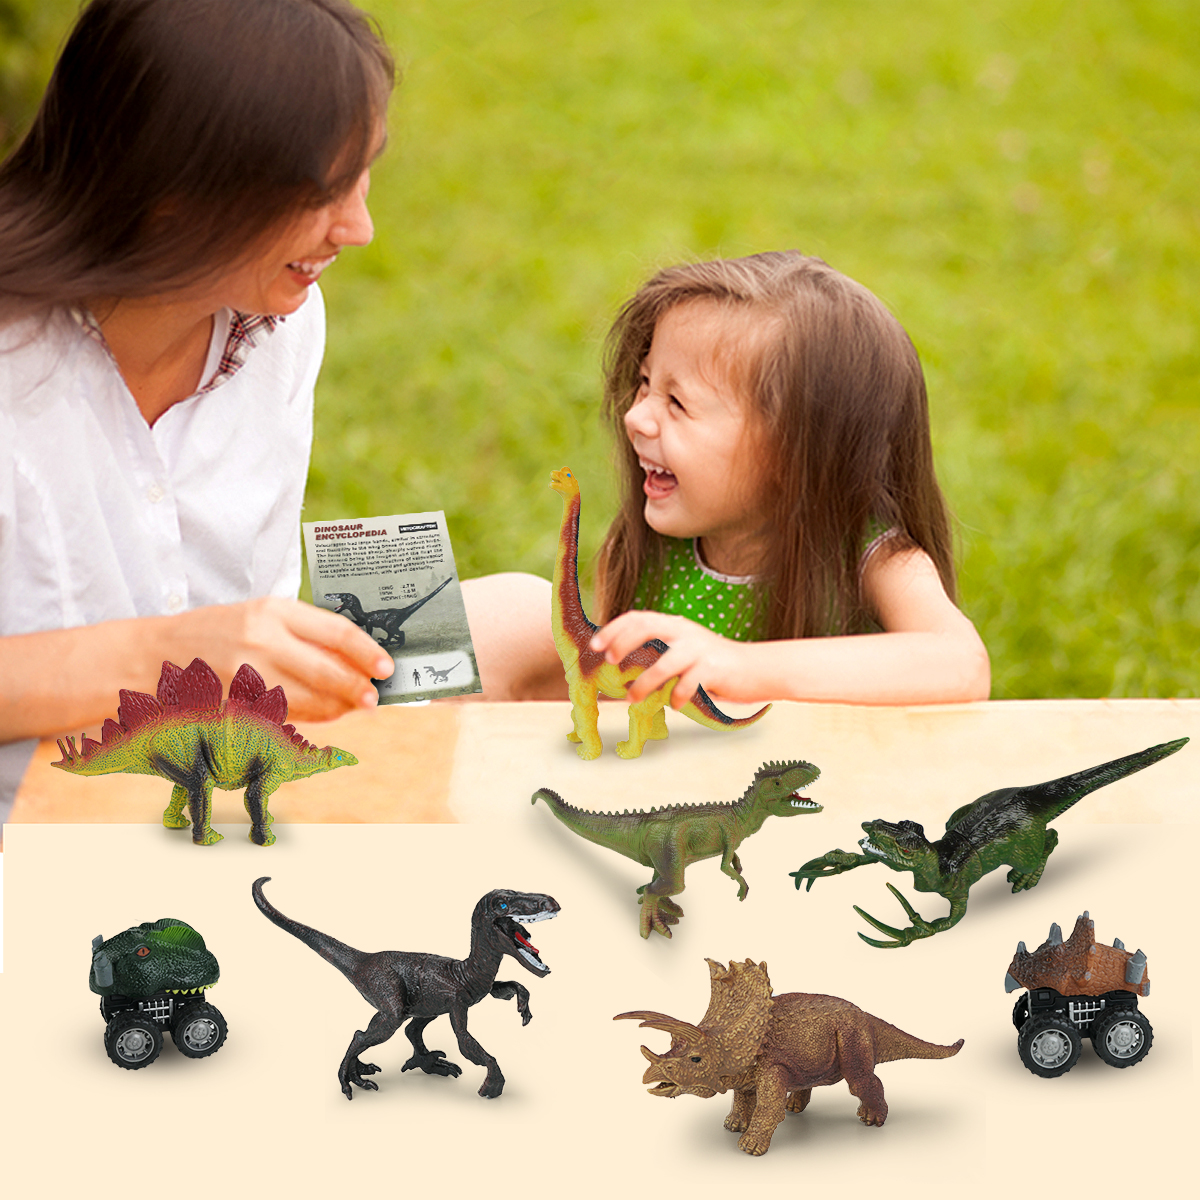 Dinosaur Toys Dinosaur Figures with Activity World Play Mat & Trees, Educational Realistic Dinosaur Playset to Create a Dino World Including Triceratops, Velociraptor, for Kids, Boys & Girls